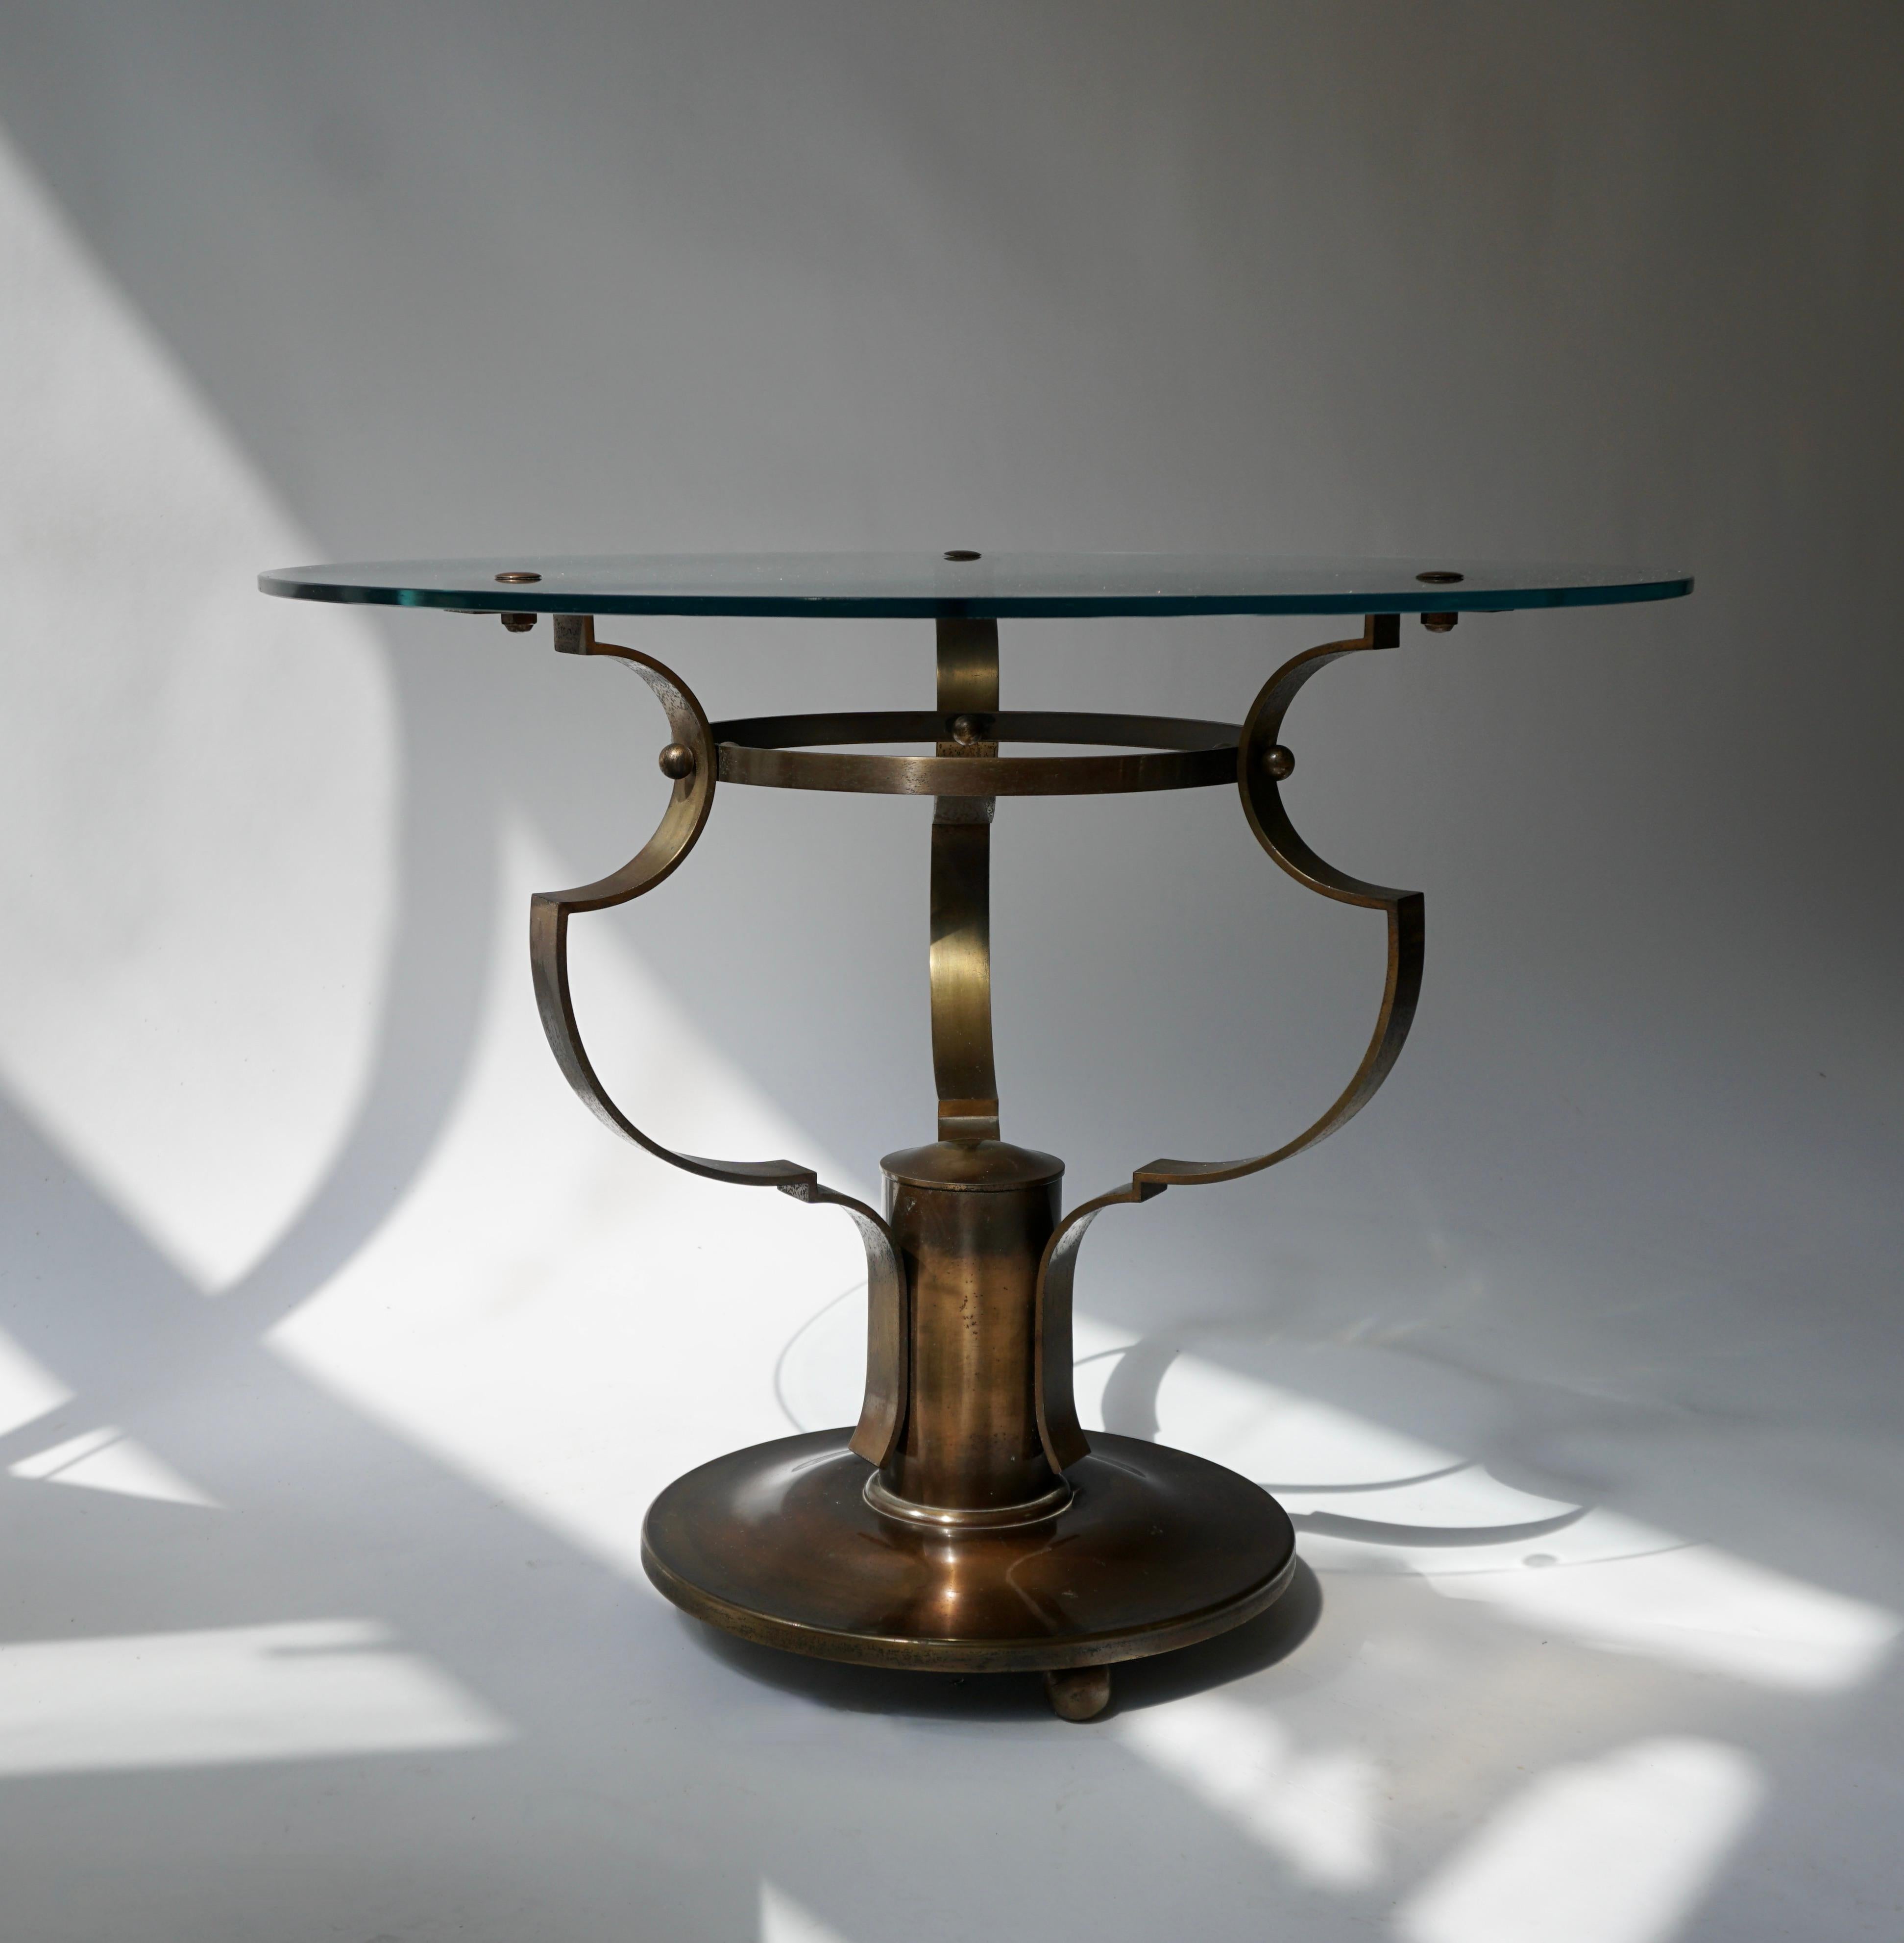 Original Art Deco round three-legged side table or gueridon in glass and bronze.
Mde in Belgium 

Dimensions: H 47 cm x Ø 60 cm.